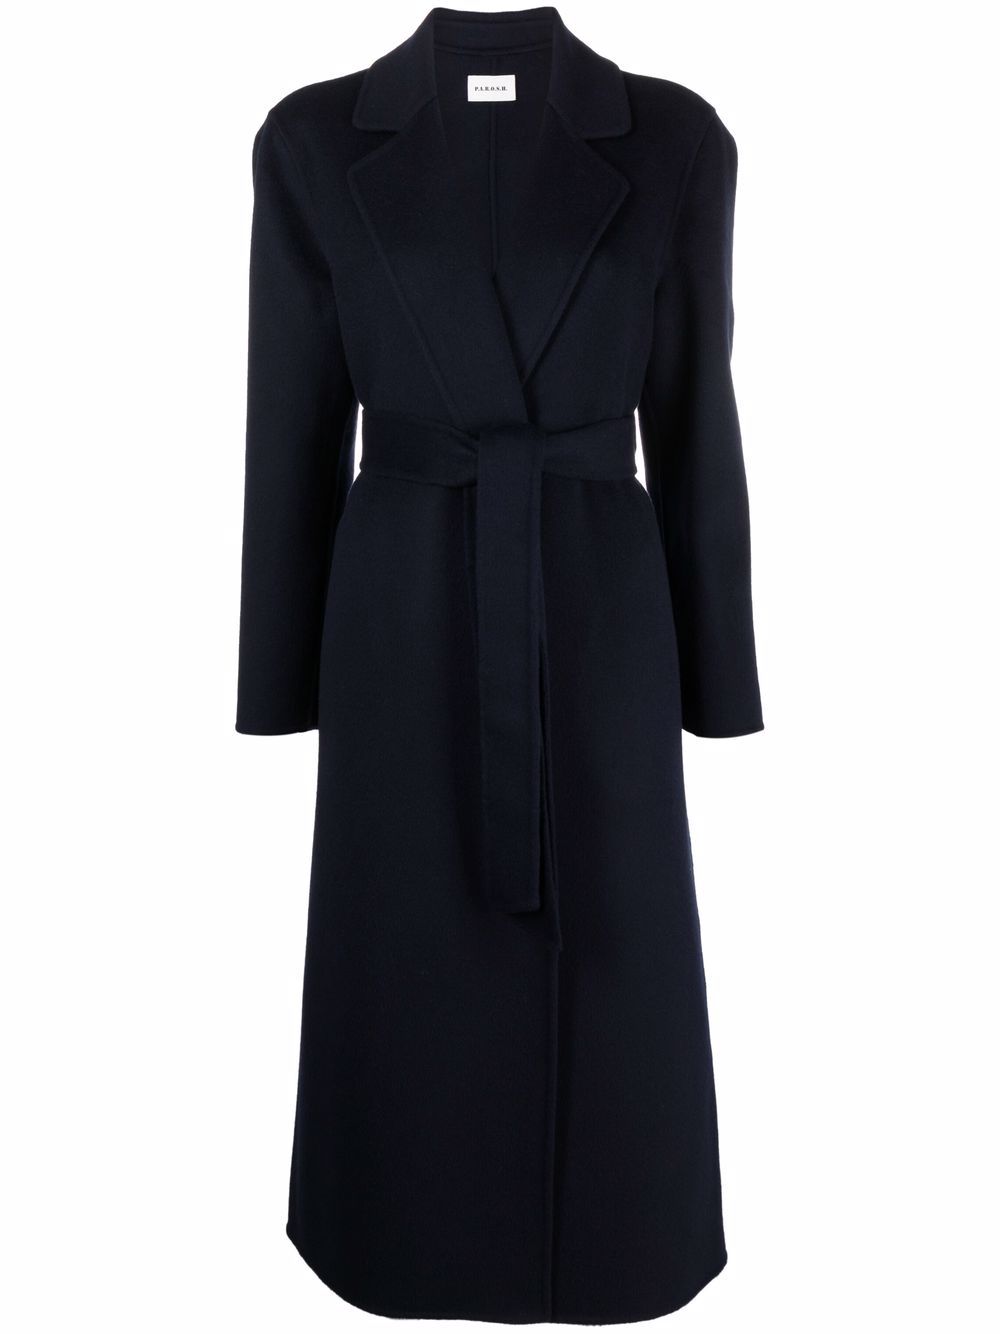 P.A.R.O.S.H. Belted mid-length Coat - Farfetch